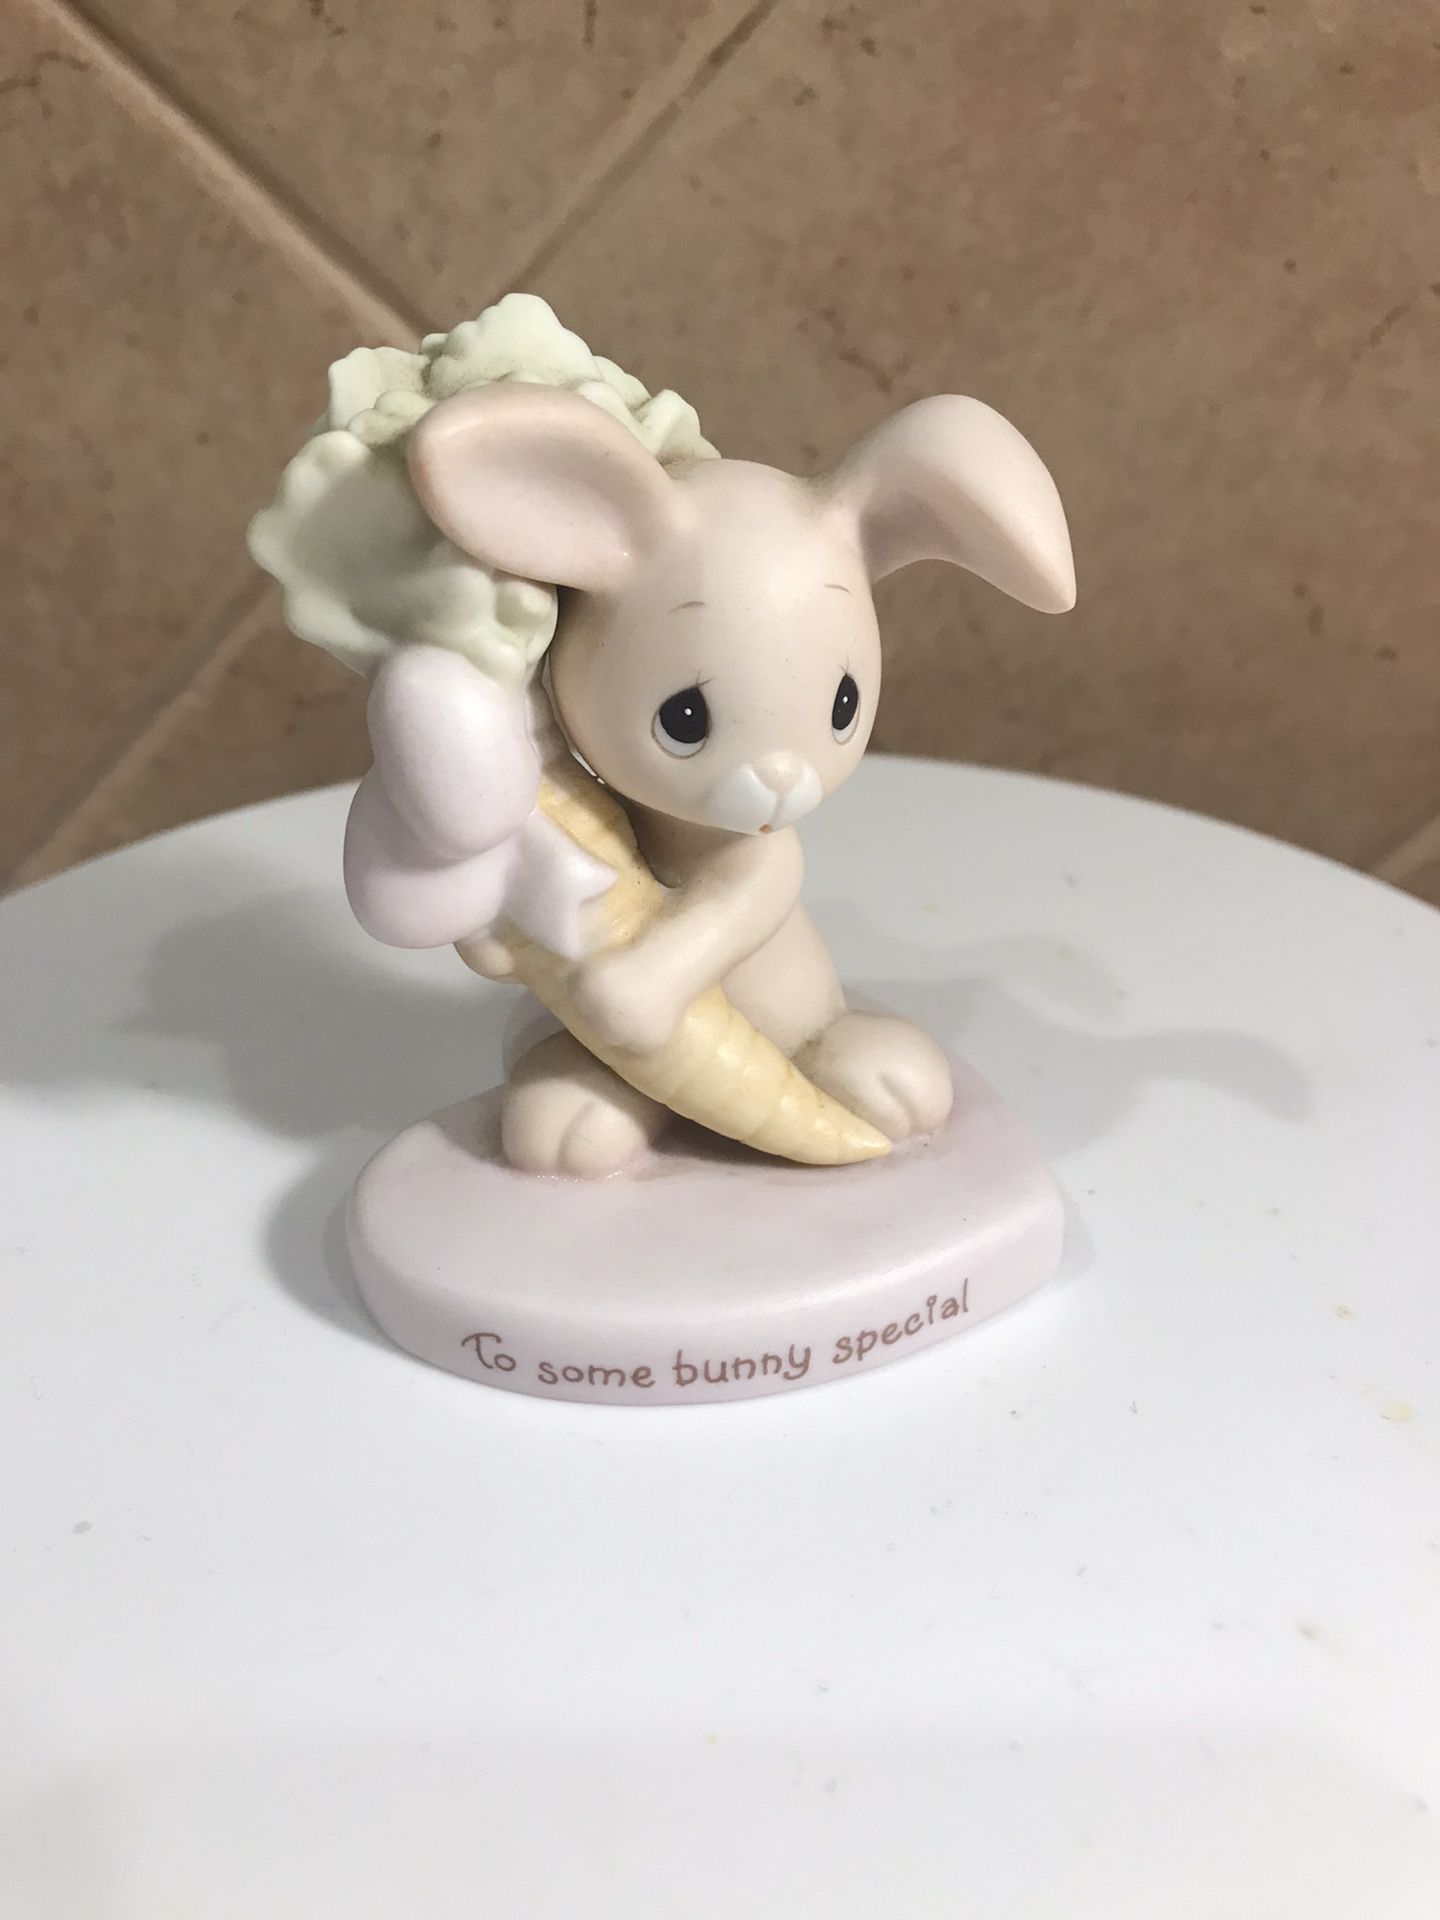 Precious Moments 1982  “To Some Bunny Special” Figure 